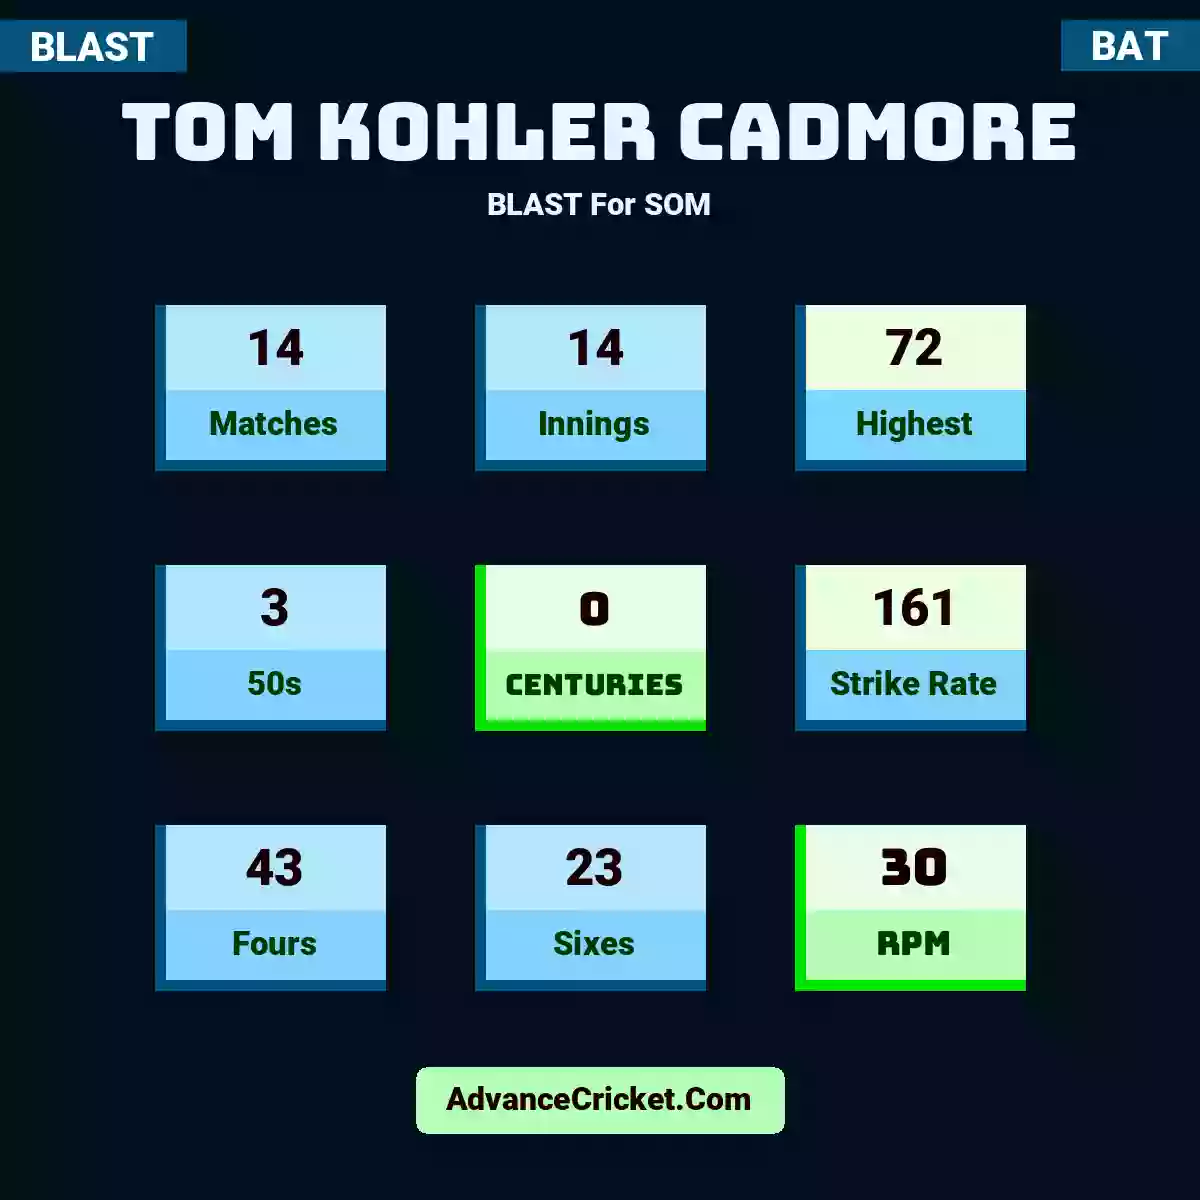 Tom Kohler Cadmore BLAST  For SOM, Tom Kohler Cadmore played 14 matches, scored 72 runs as highest, 3 half-centuries, and 0 centuries, with a strike rate of 161. T.Cadmore hit 43 fours and 23 sixes, with an RPM of 30.